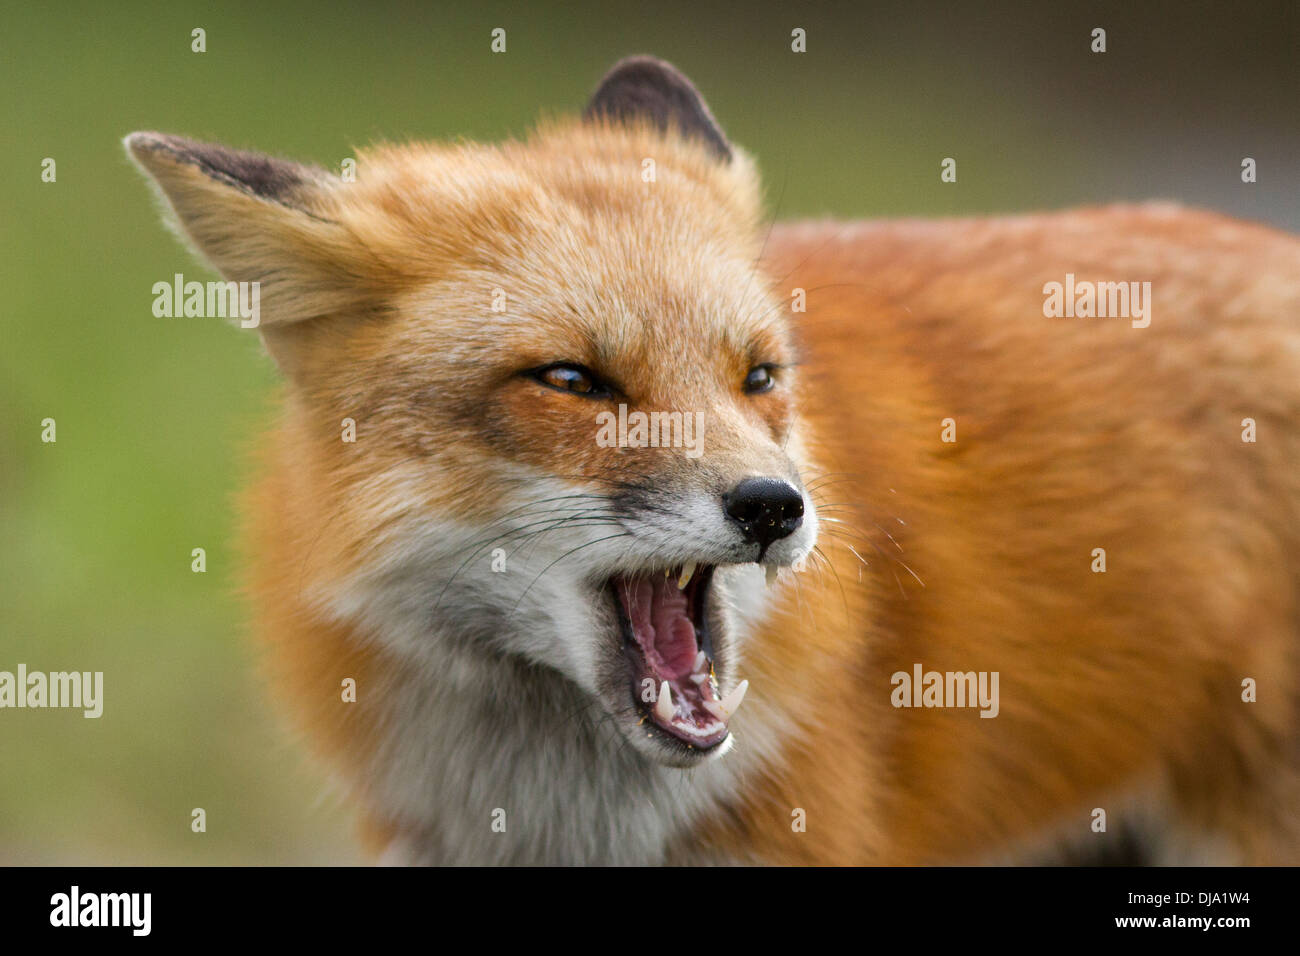 Angry red fox close up. Banque D'Images